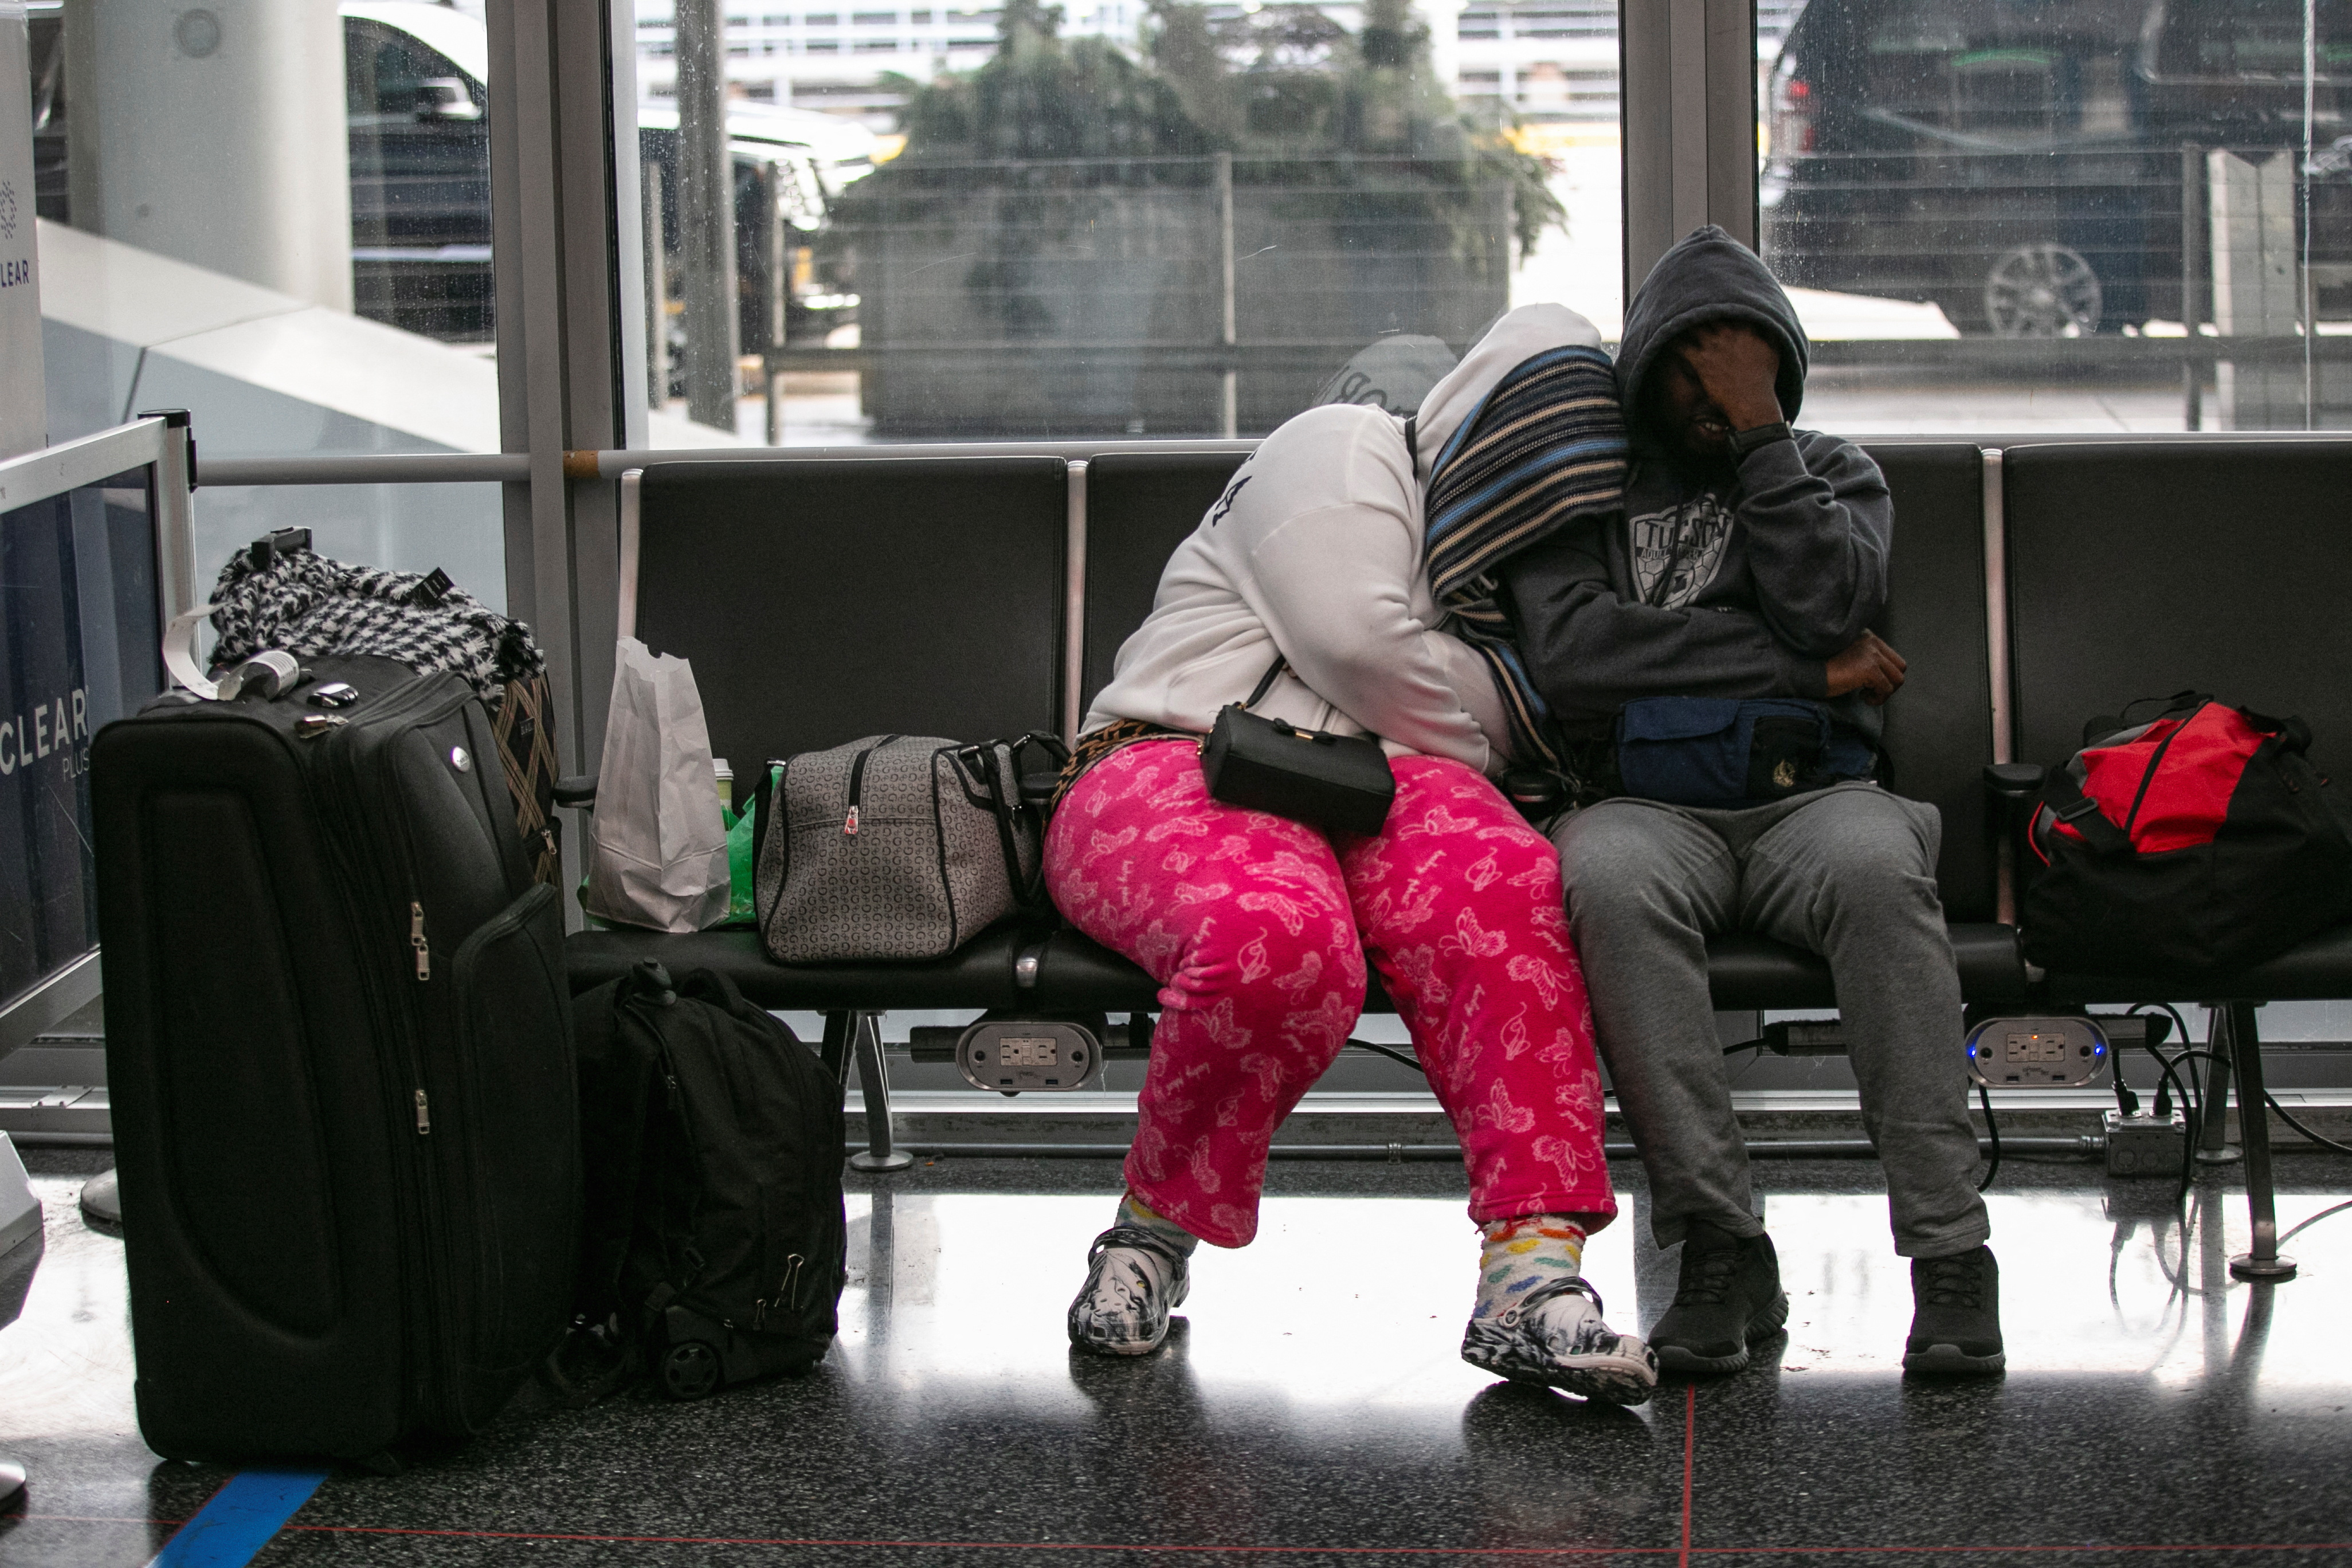 Passengers wait at O'Hare Airport in Chicago, one of the world's busiest airports. /Jim Vondruska/Reuters